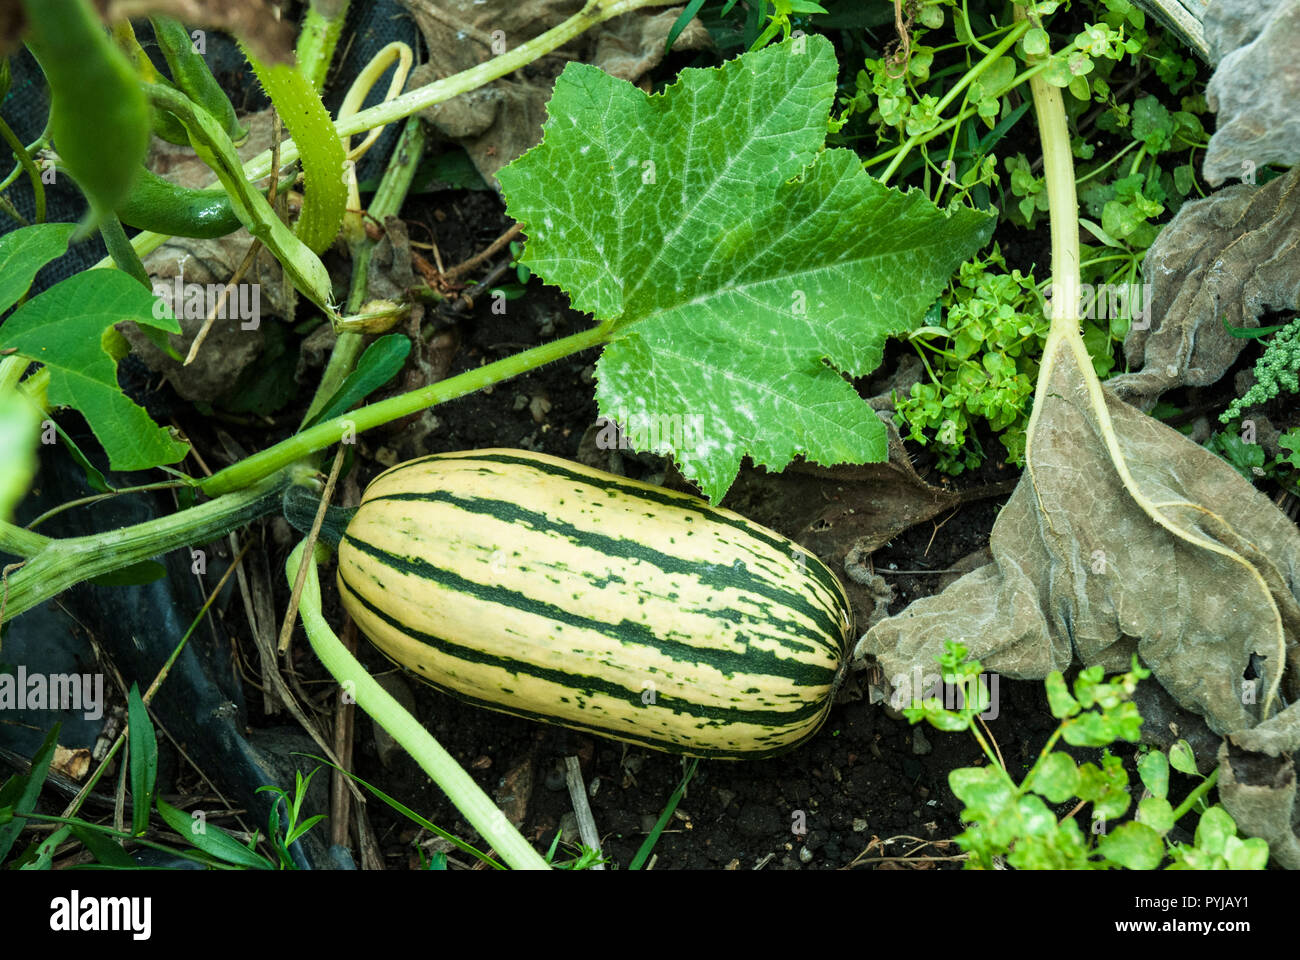 Cream with green striped Honey Boat squash pumpkin growing, with foliage. Stock Photo